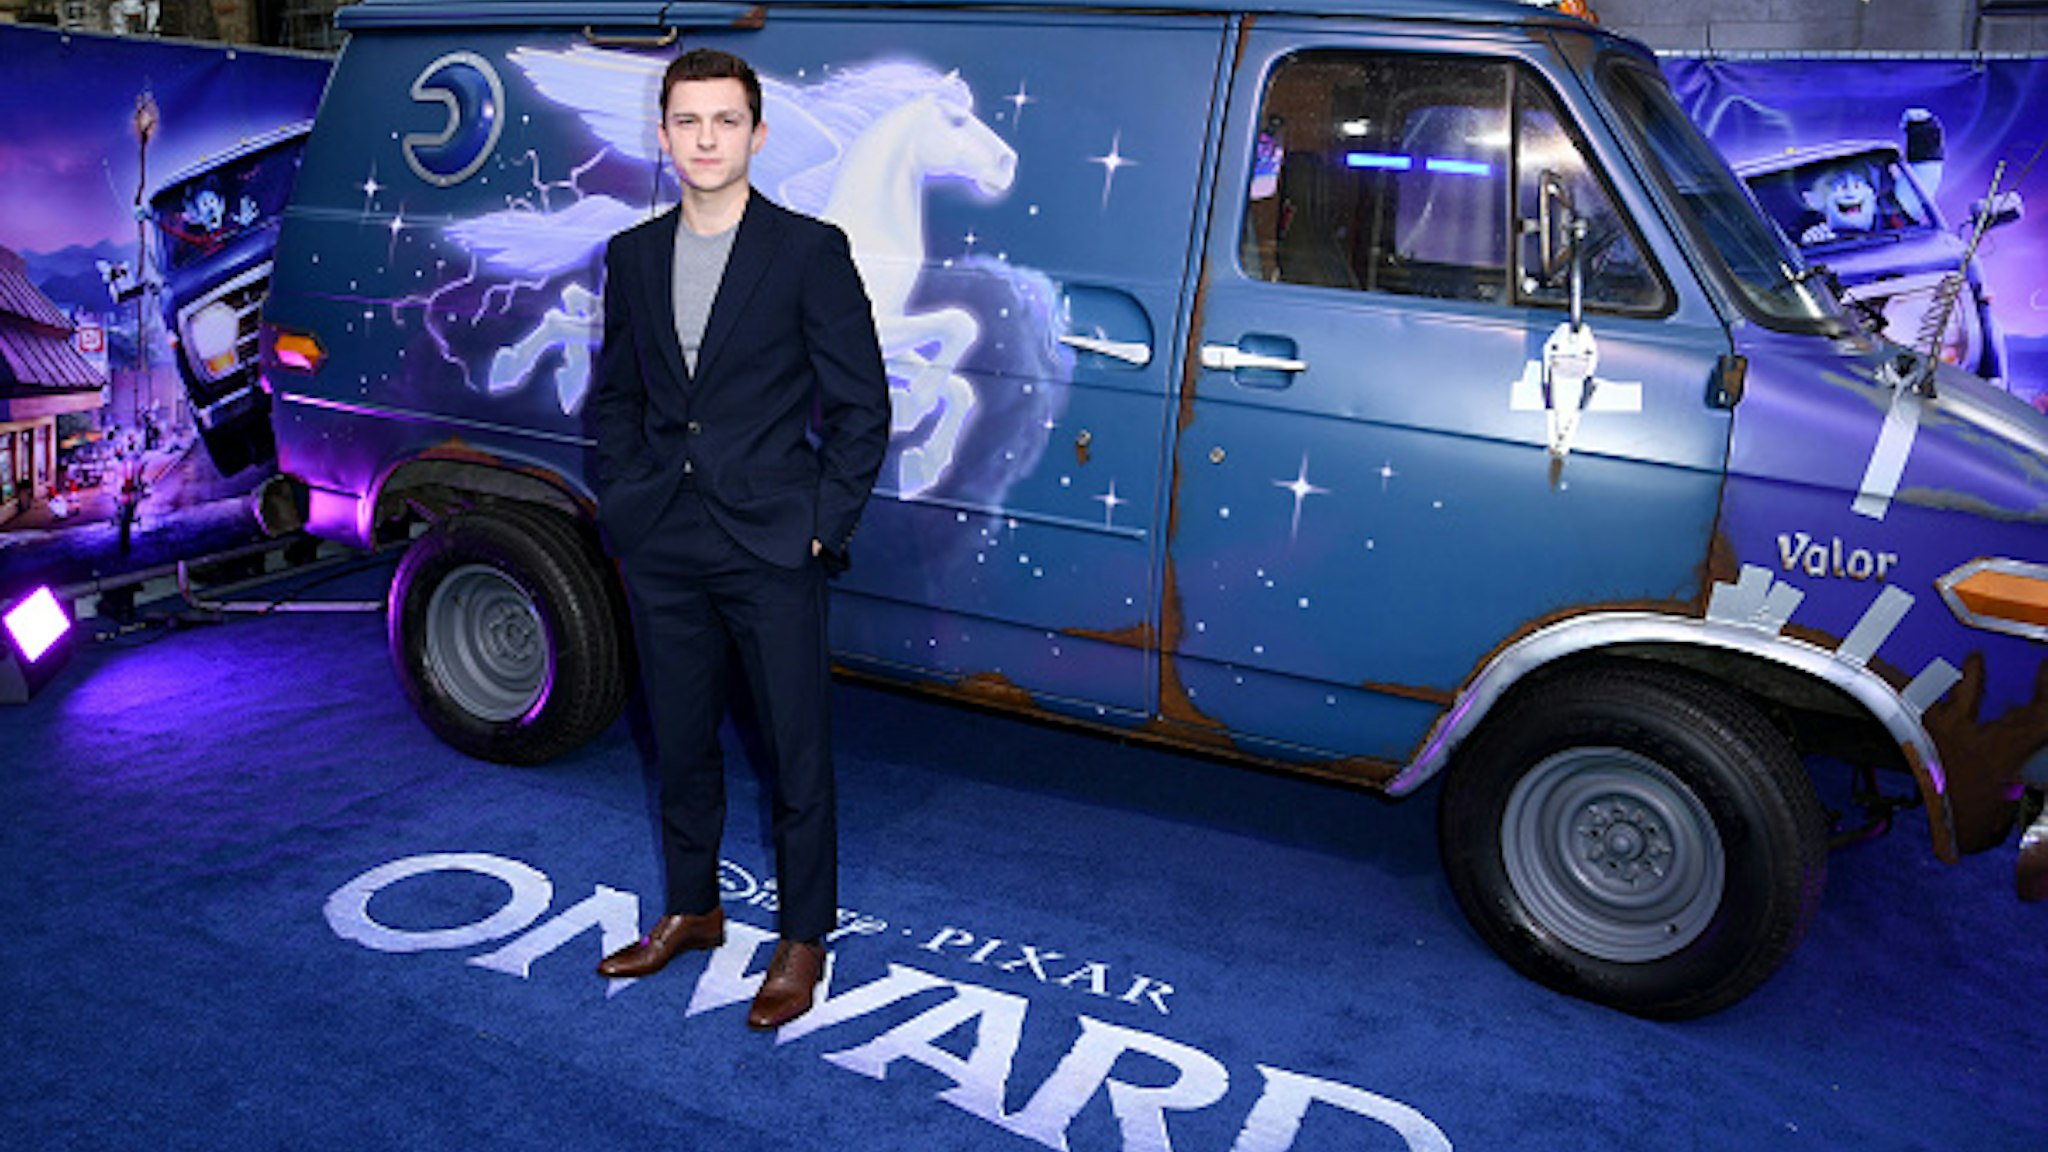 LONDON, ENGLAND - FEBRUARY 23: Tom Holland attends the UK Premiere Of Disney And Pixar's "Onward" at The Curzon Mayfair on February 23, 2020 in London, England.